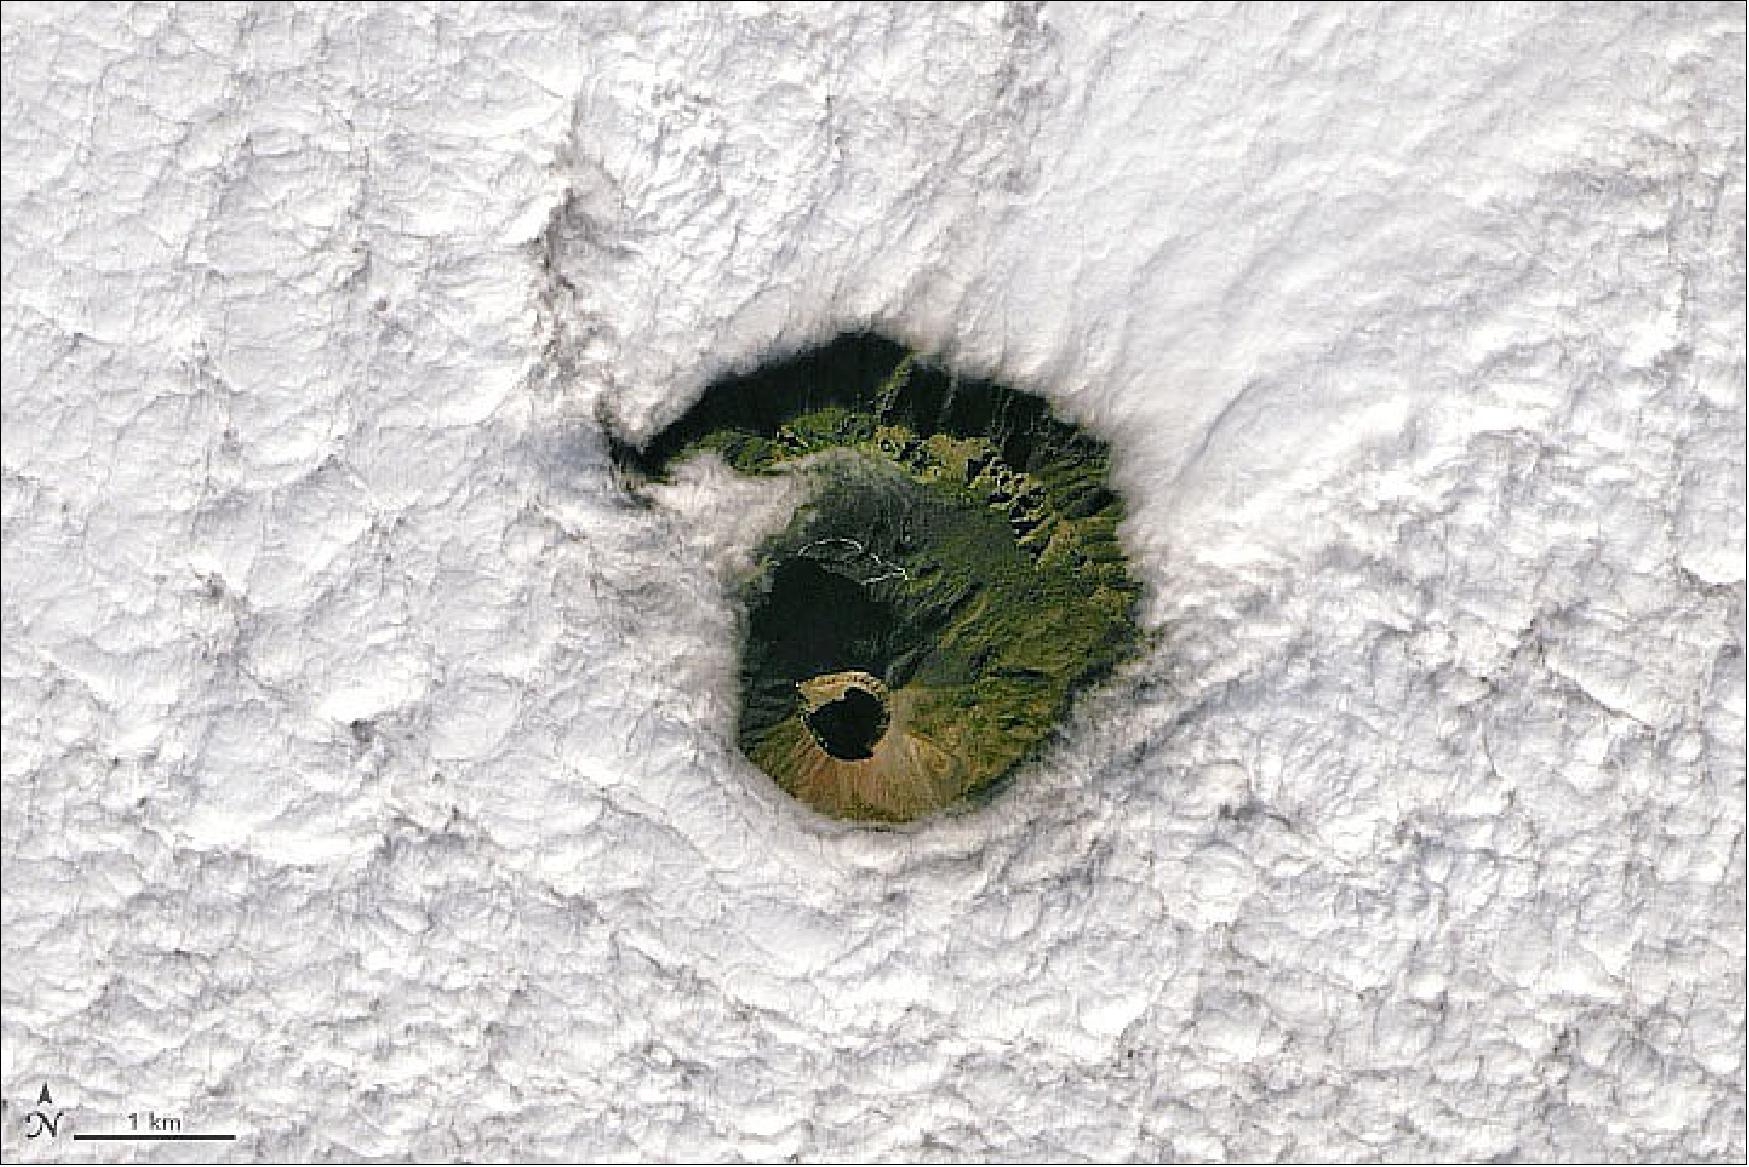 Figure 92: In this natural-color image, acquired on January 2, 2022, by the Operational Land Imager (OLI) on Landsat-8, the cone of Mount Vesuvius appears through a break in the clouds. The ridge surrounding the cone is a remnant of the collapsed caldera of an older volcano, Mount Somma, from which the cone of Vesuvius emerged (image credit: NASA Earth Observatory image by Joshua Stevens, using Landsat data from the U.S. Geological Survey. Story by Sara E. Pratt)